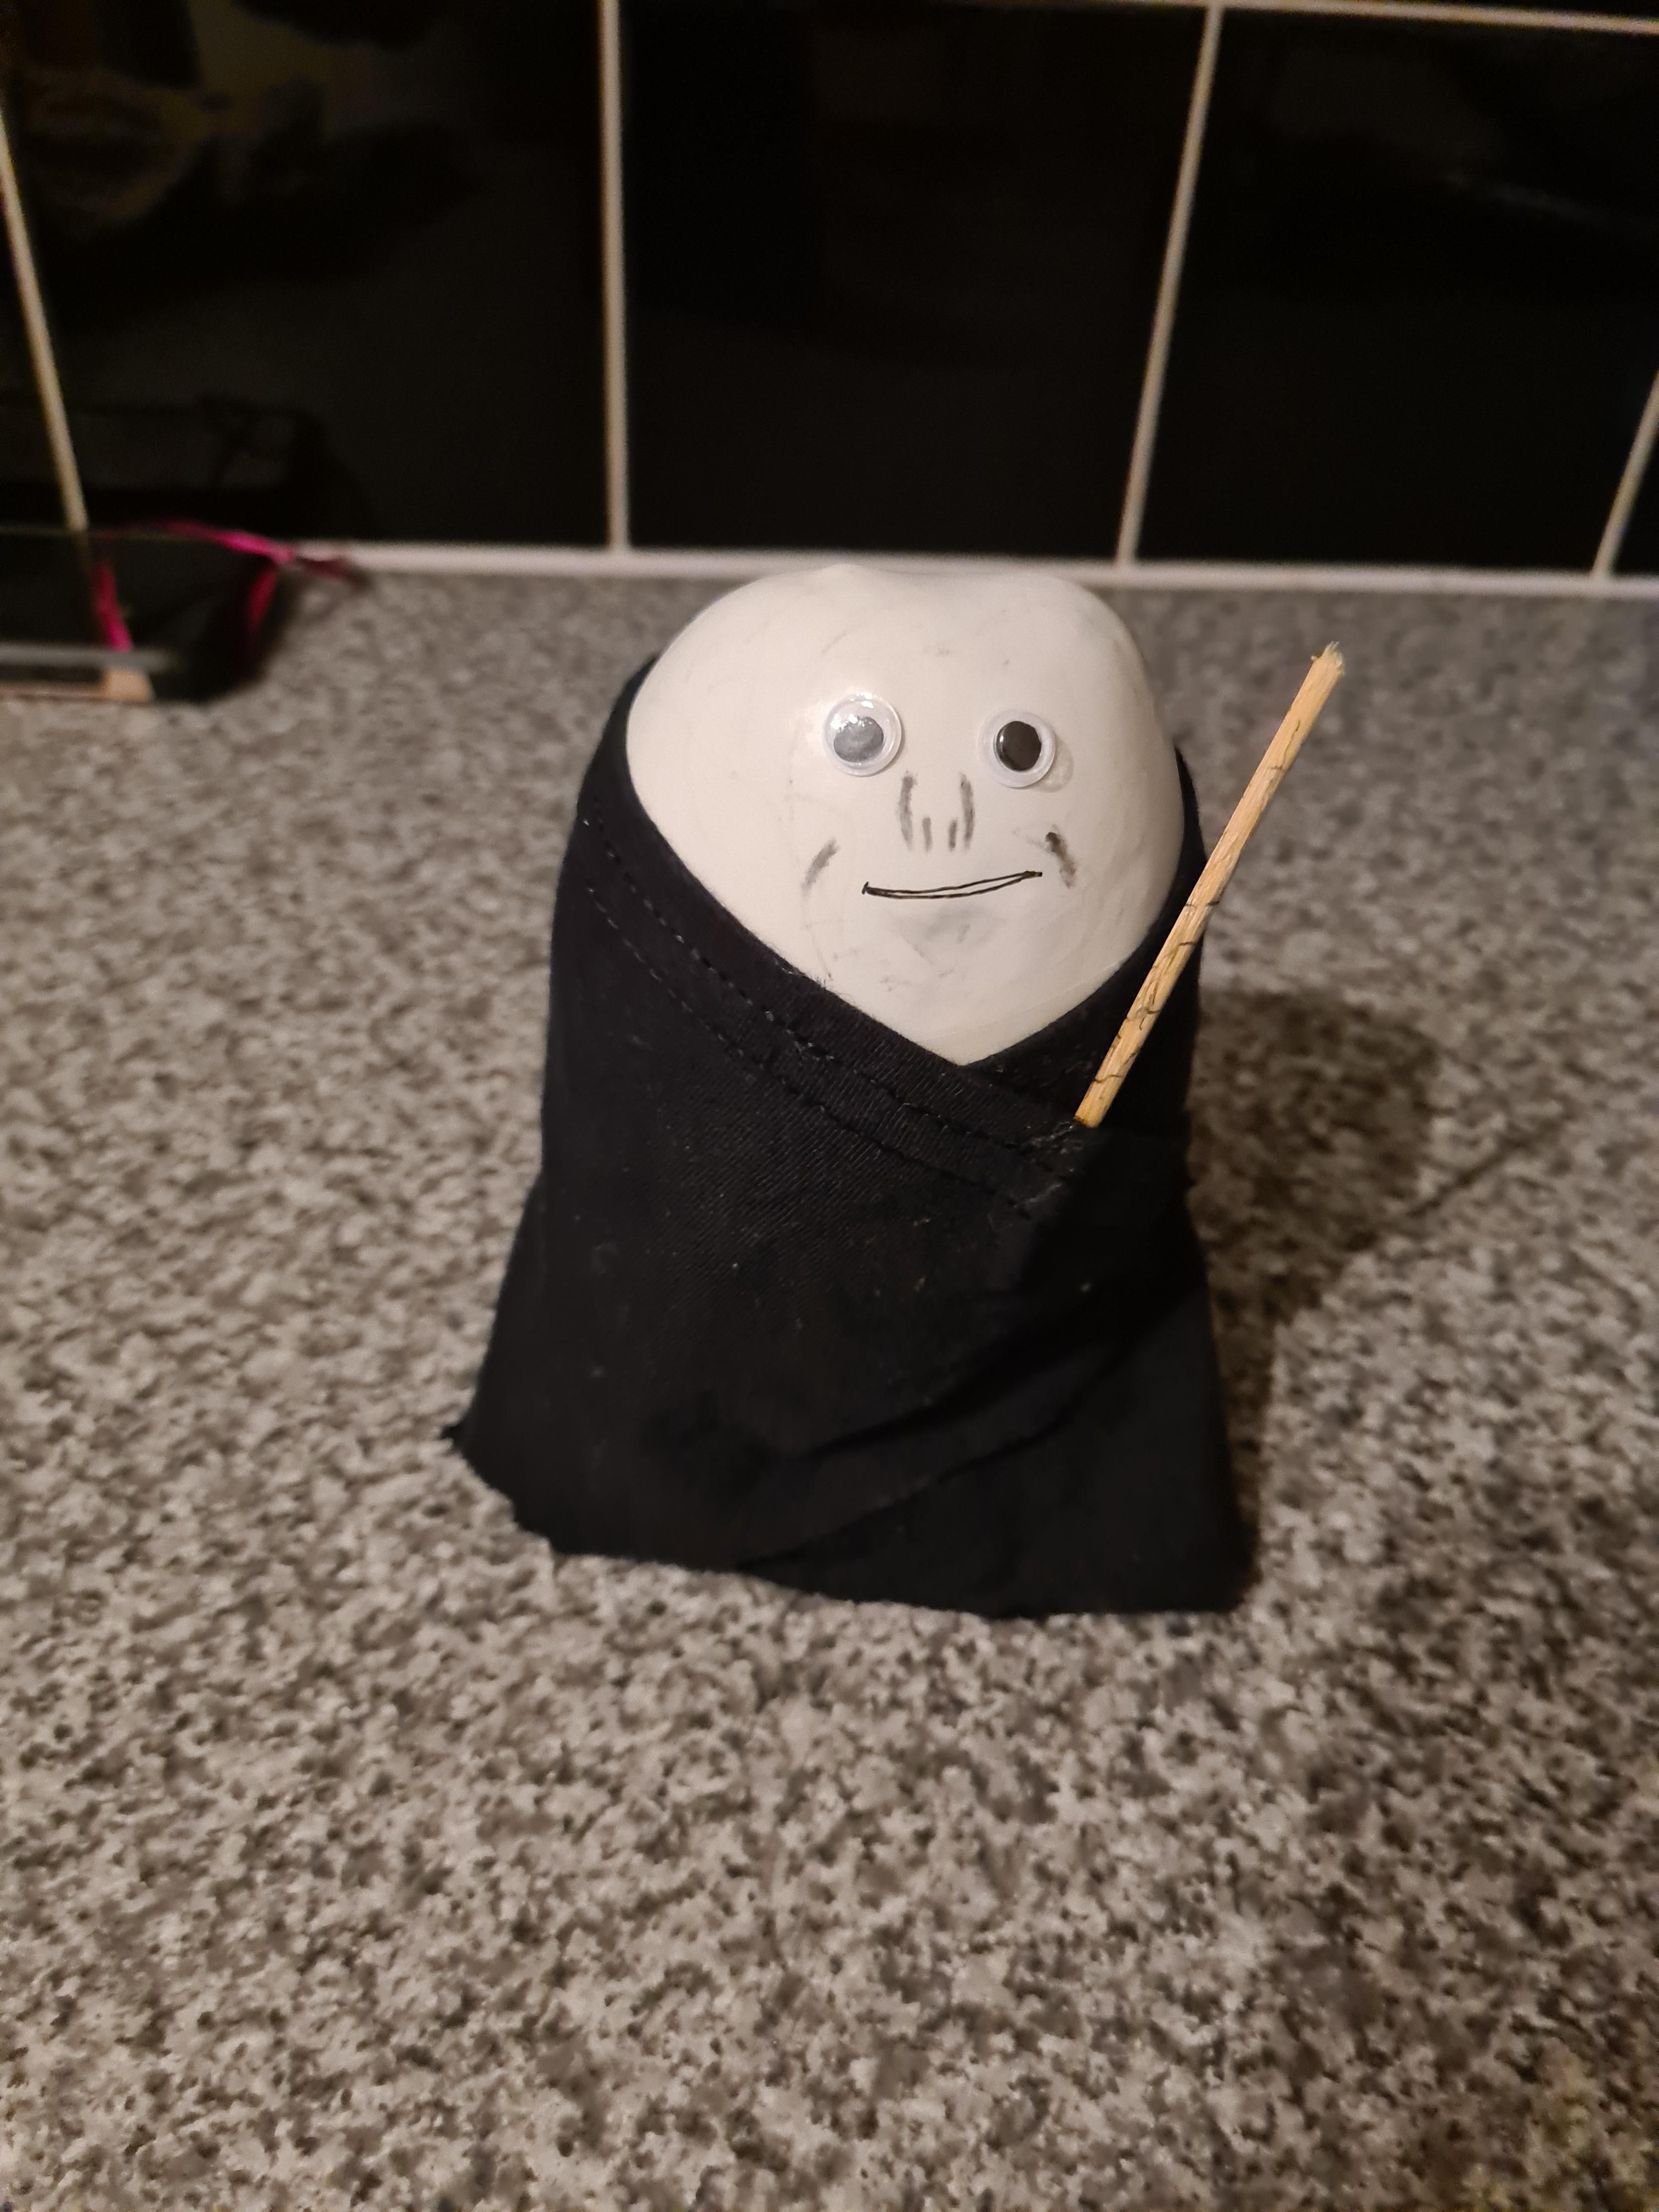 My daughter's school don't dress up for world book Day, but we have to dress a potato as a character. Any guesses who it is?